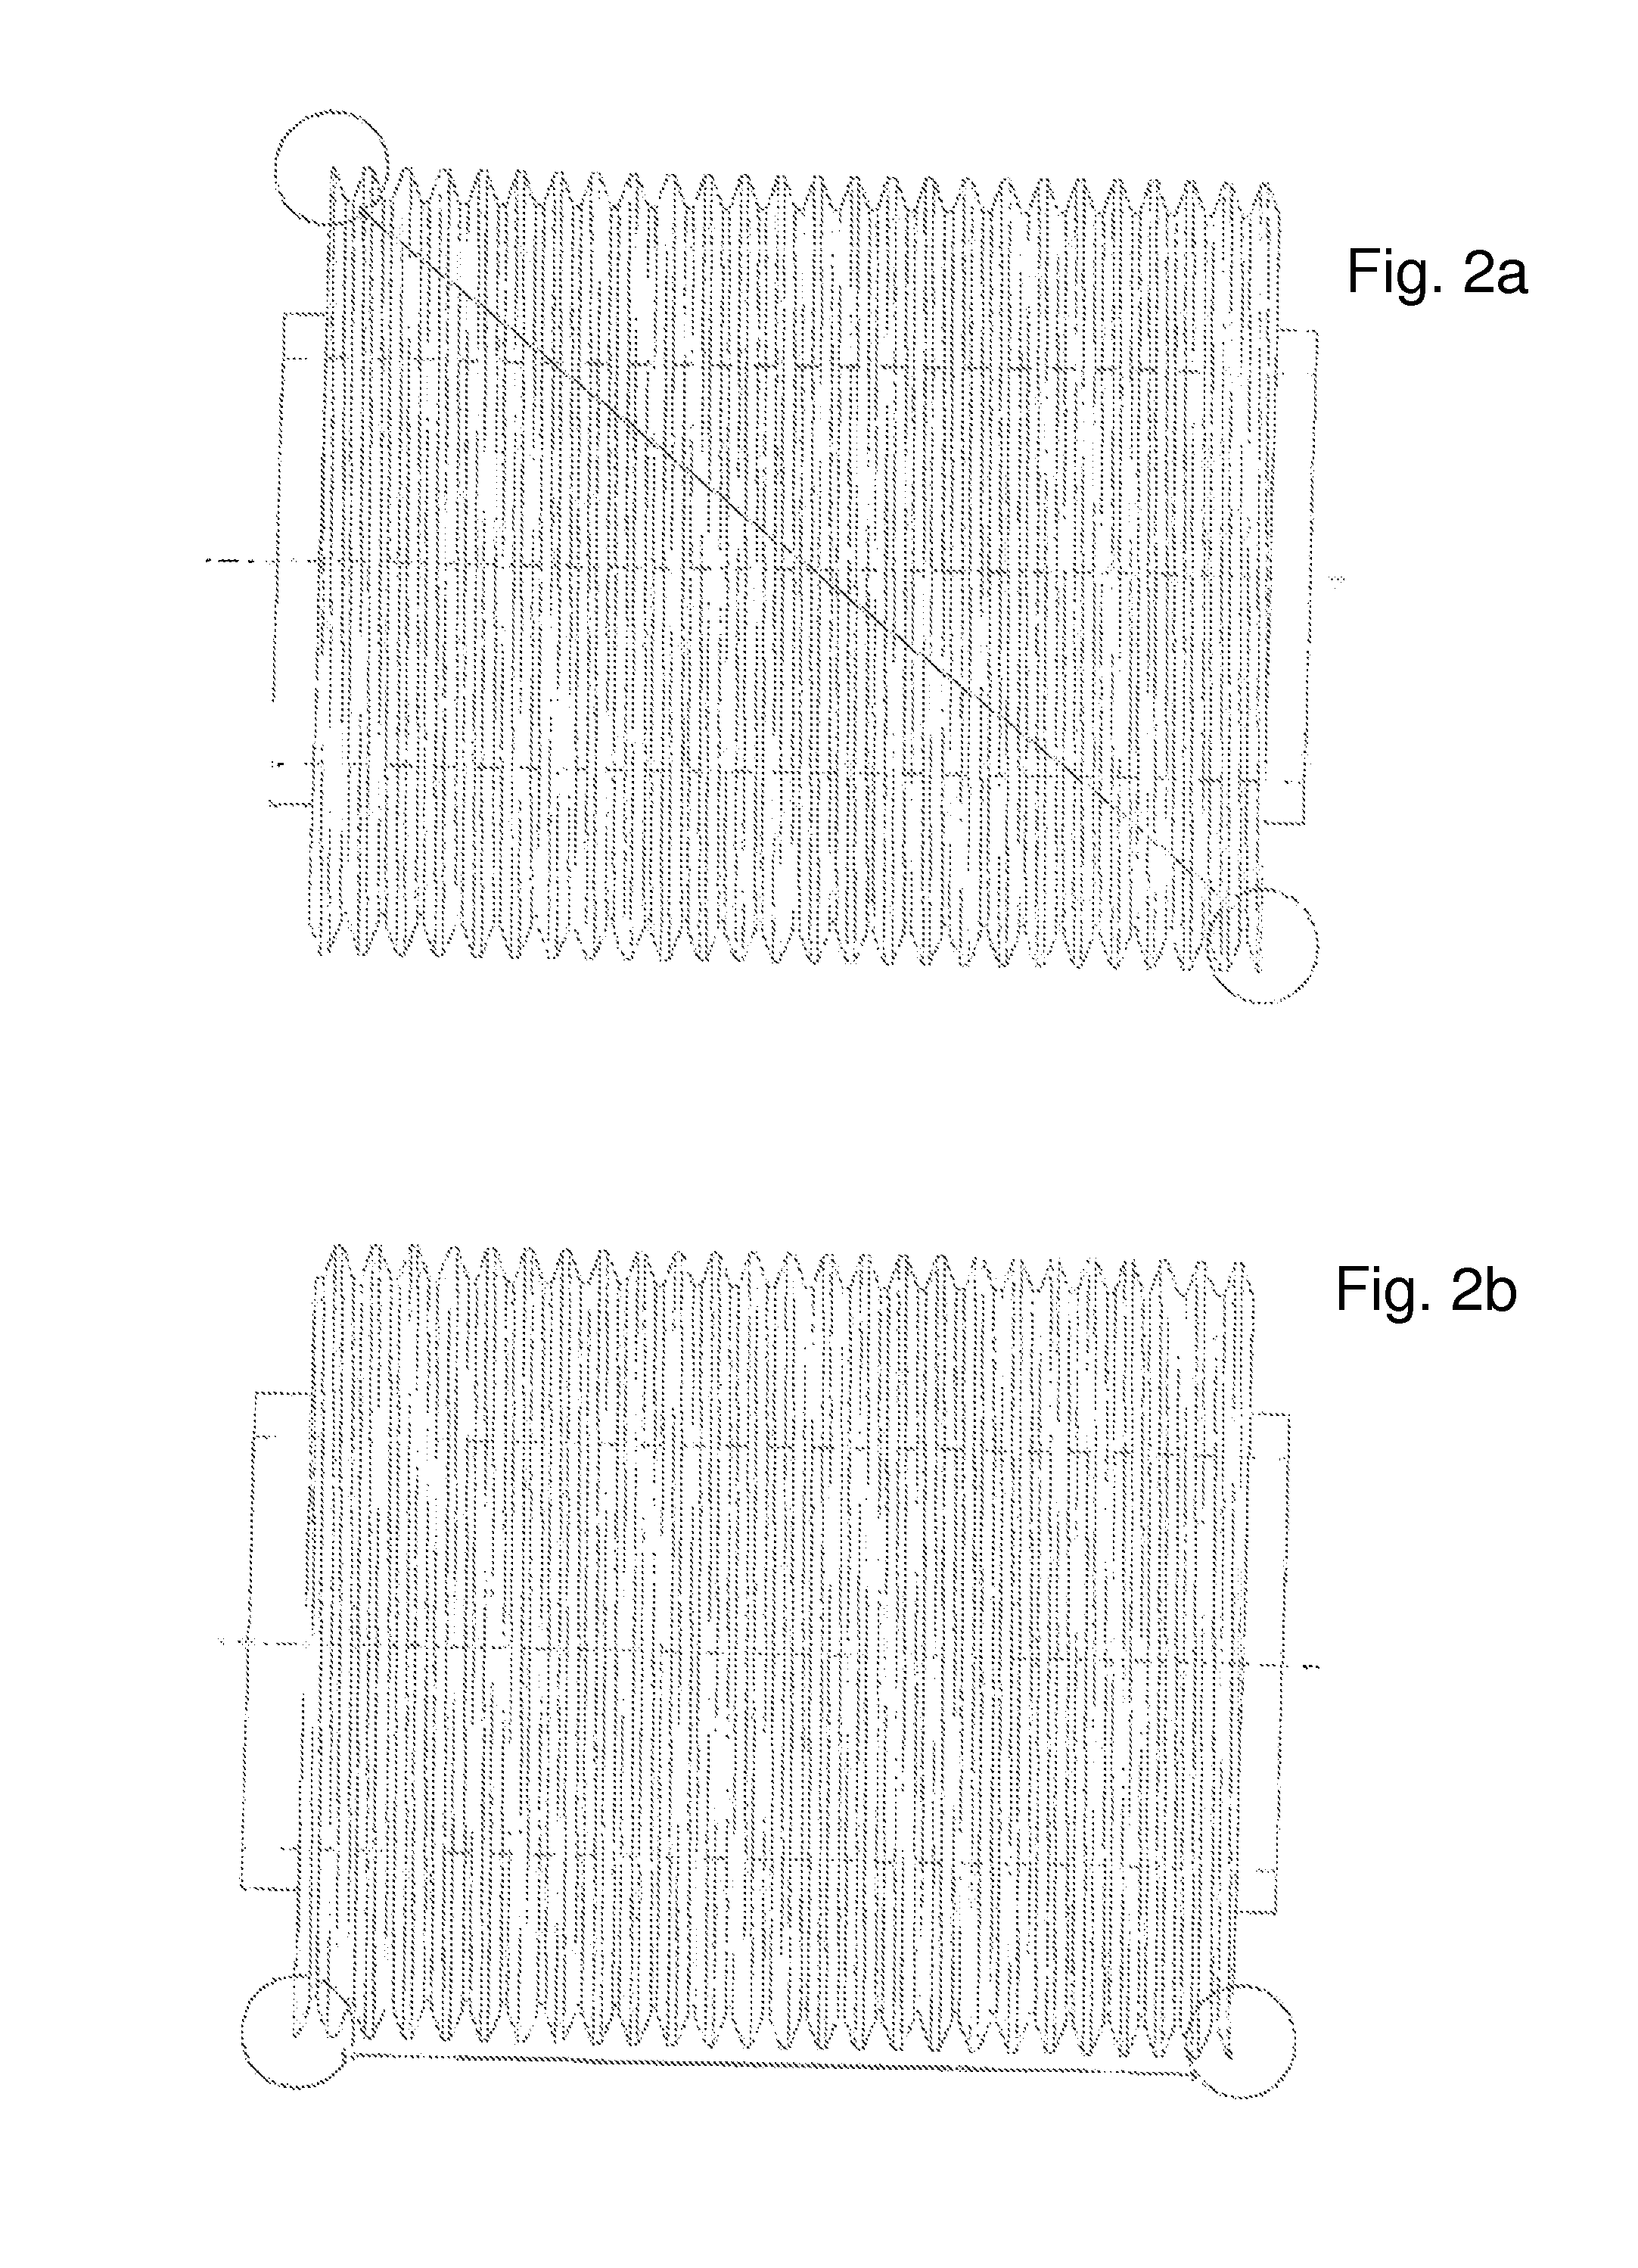 Method and apparatus for hard finishing modified gears